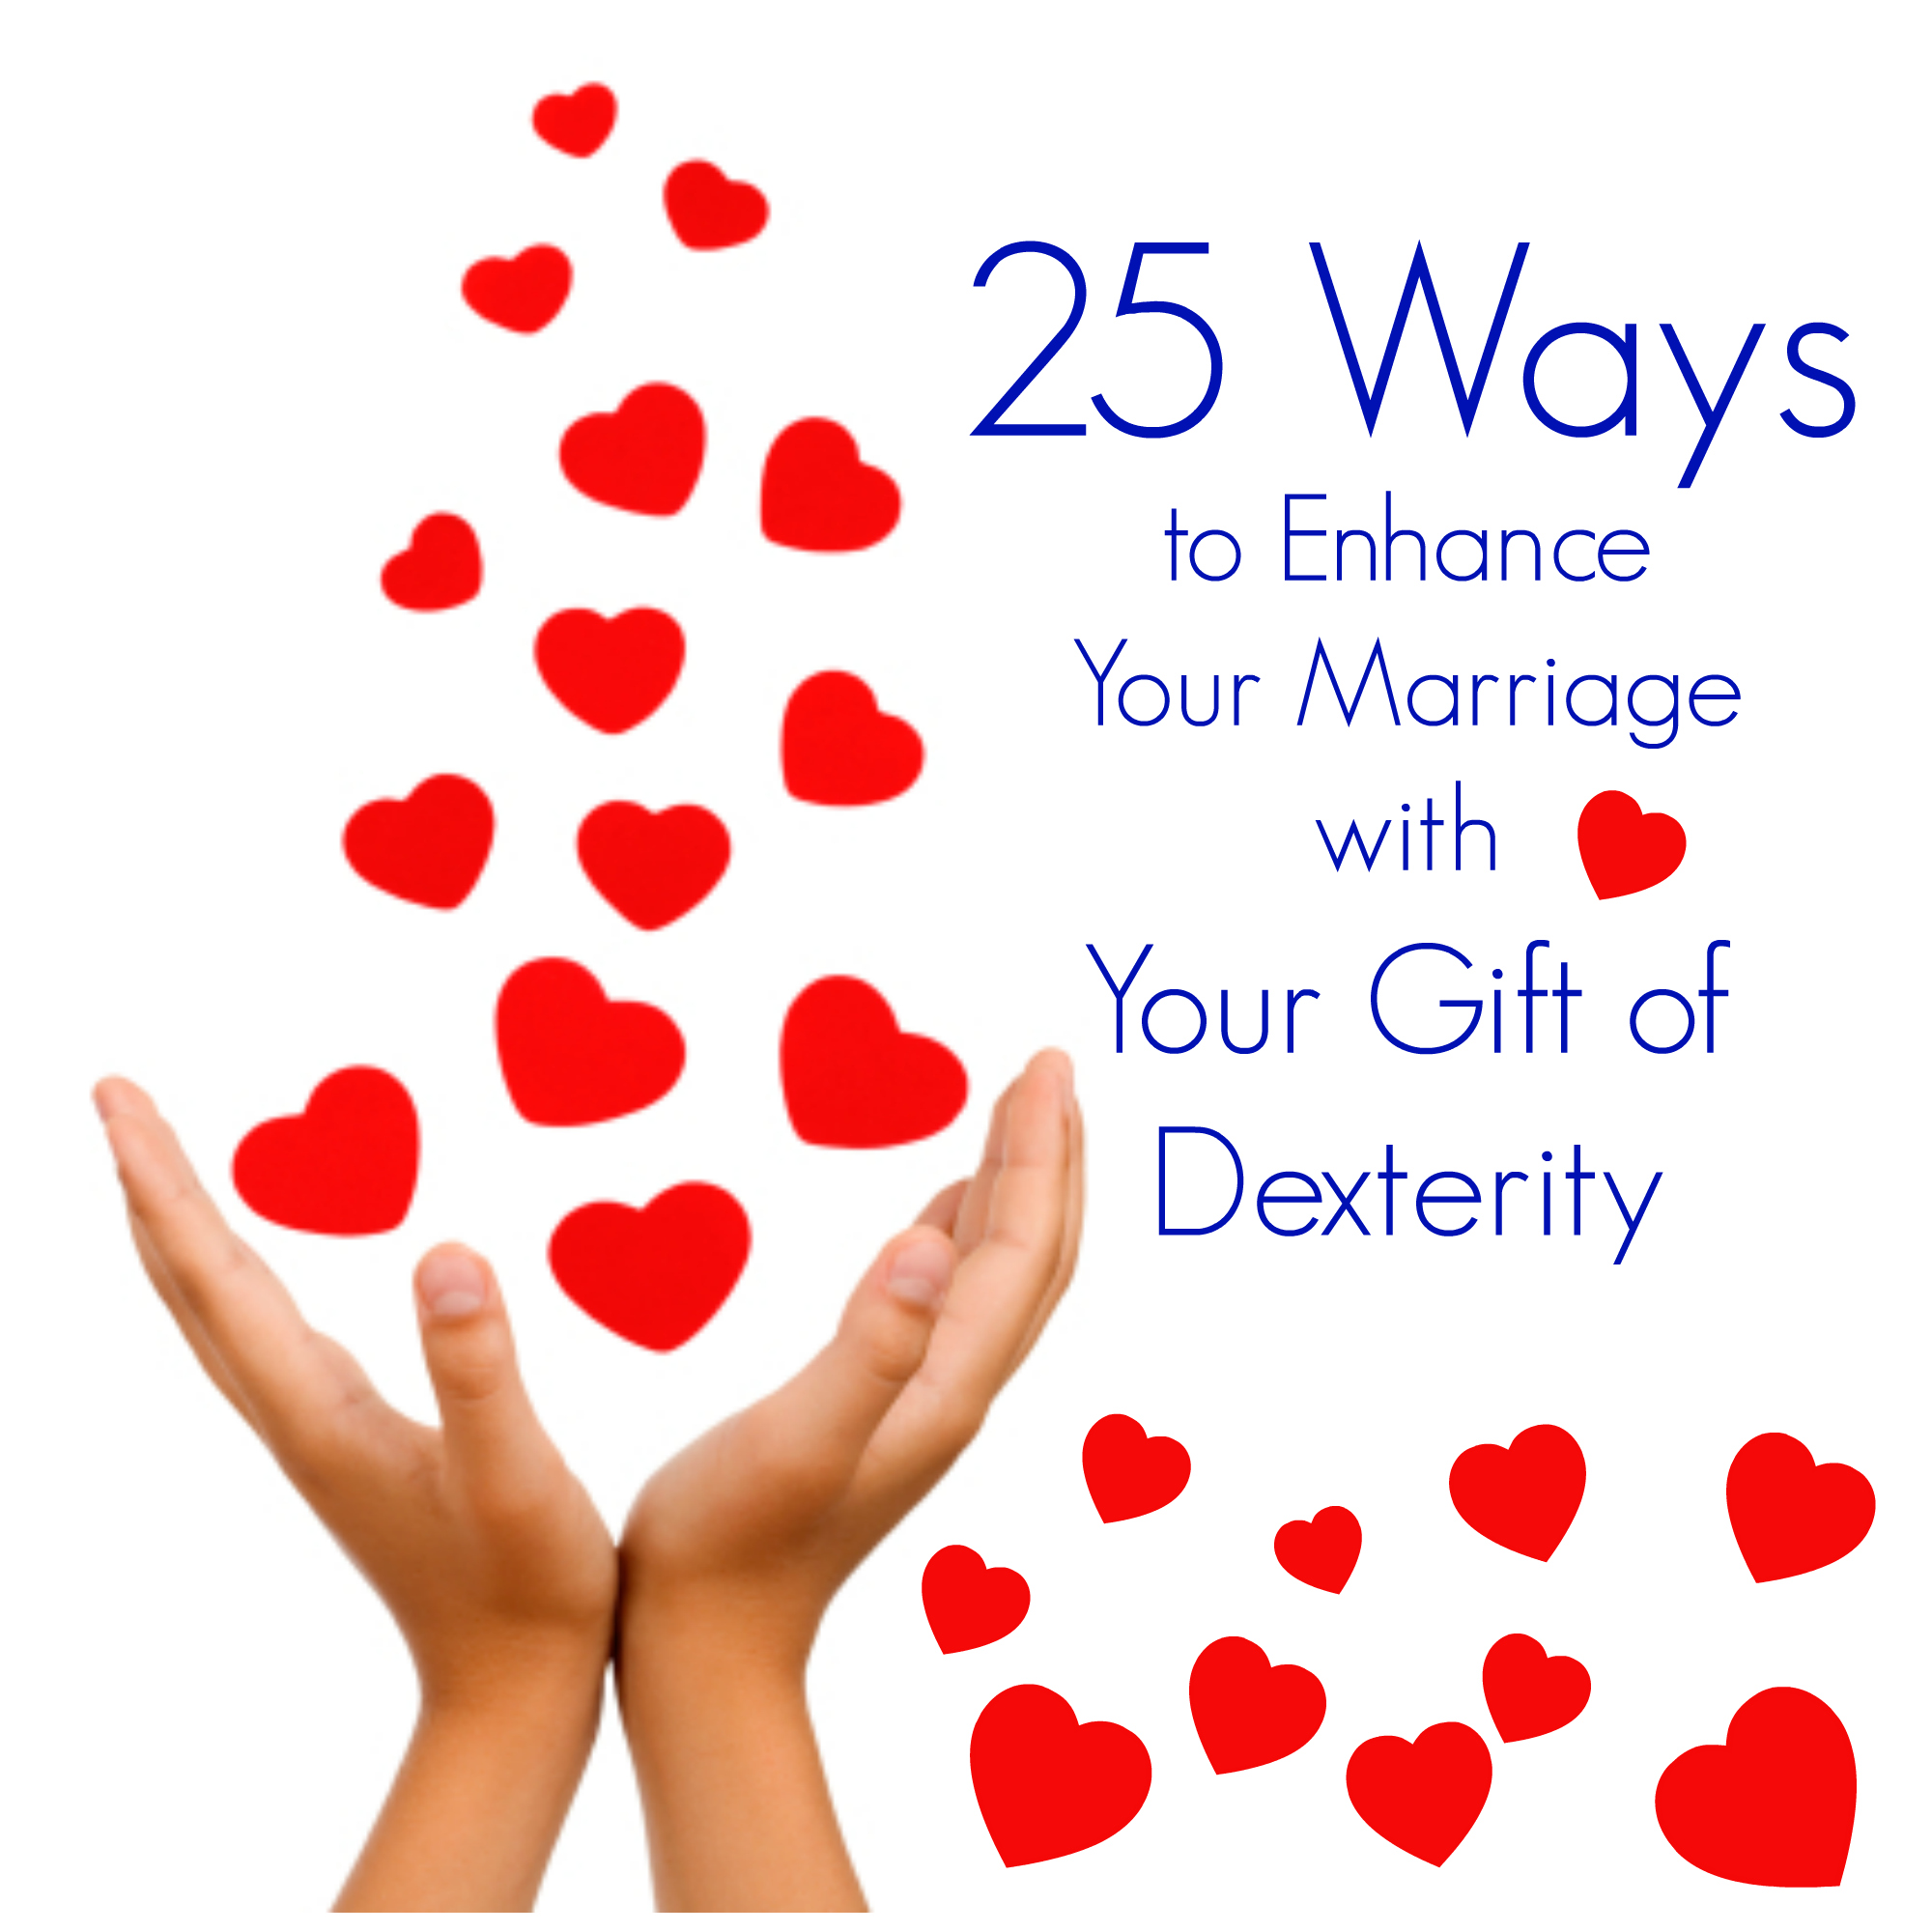 25 Ways To Enhance Your Marriage With Your Gift Of Dexterity